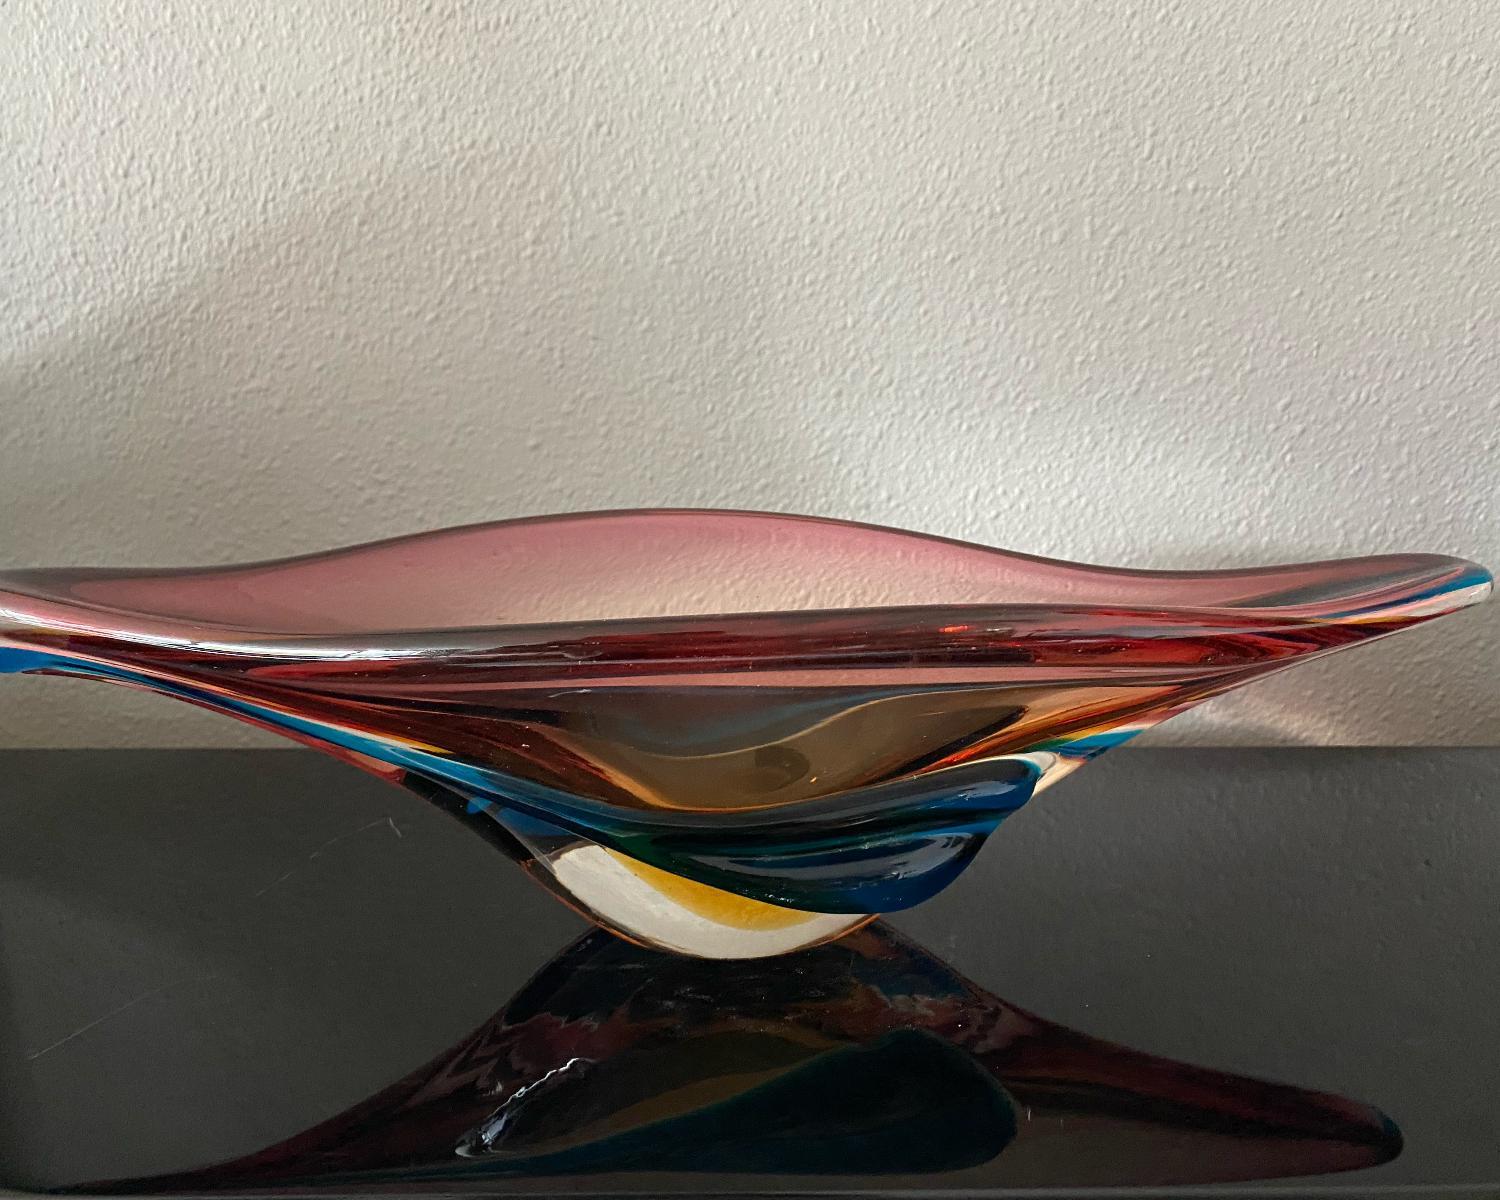 Stunning colored Murano glass fruit bowl in a beautiful shape.